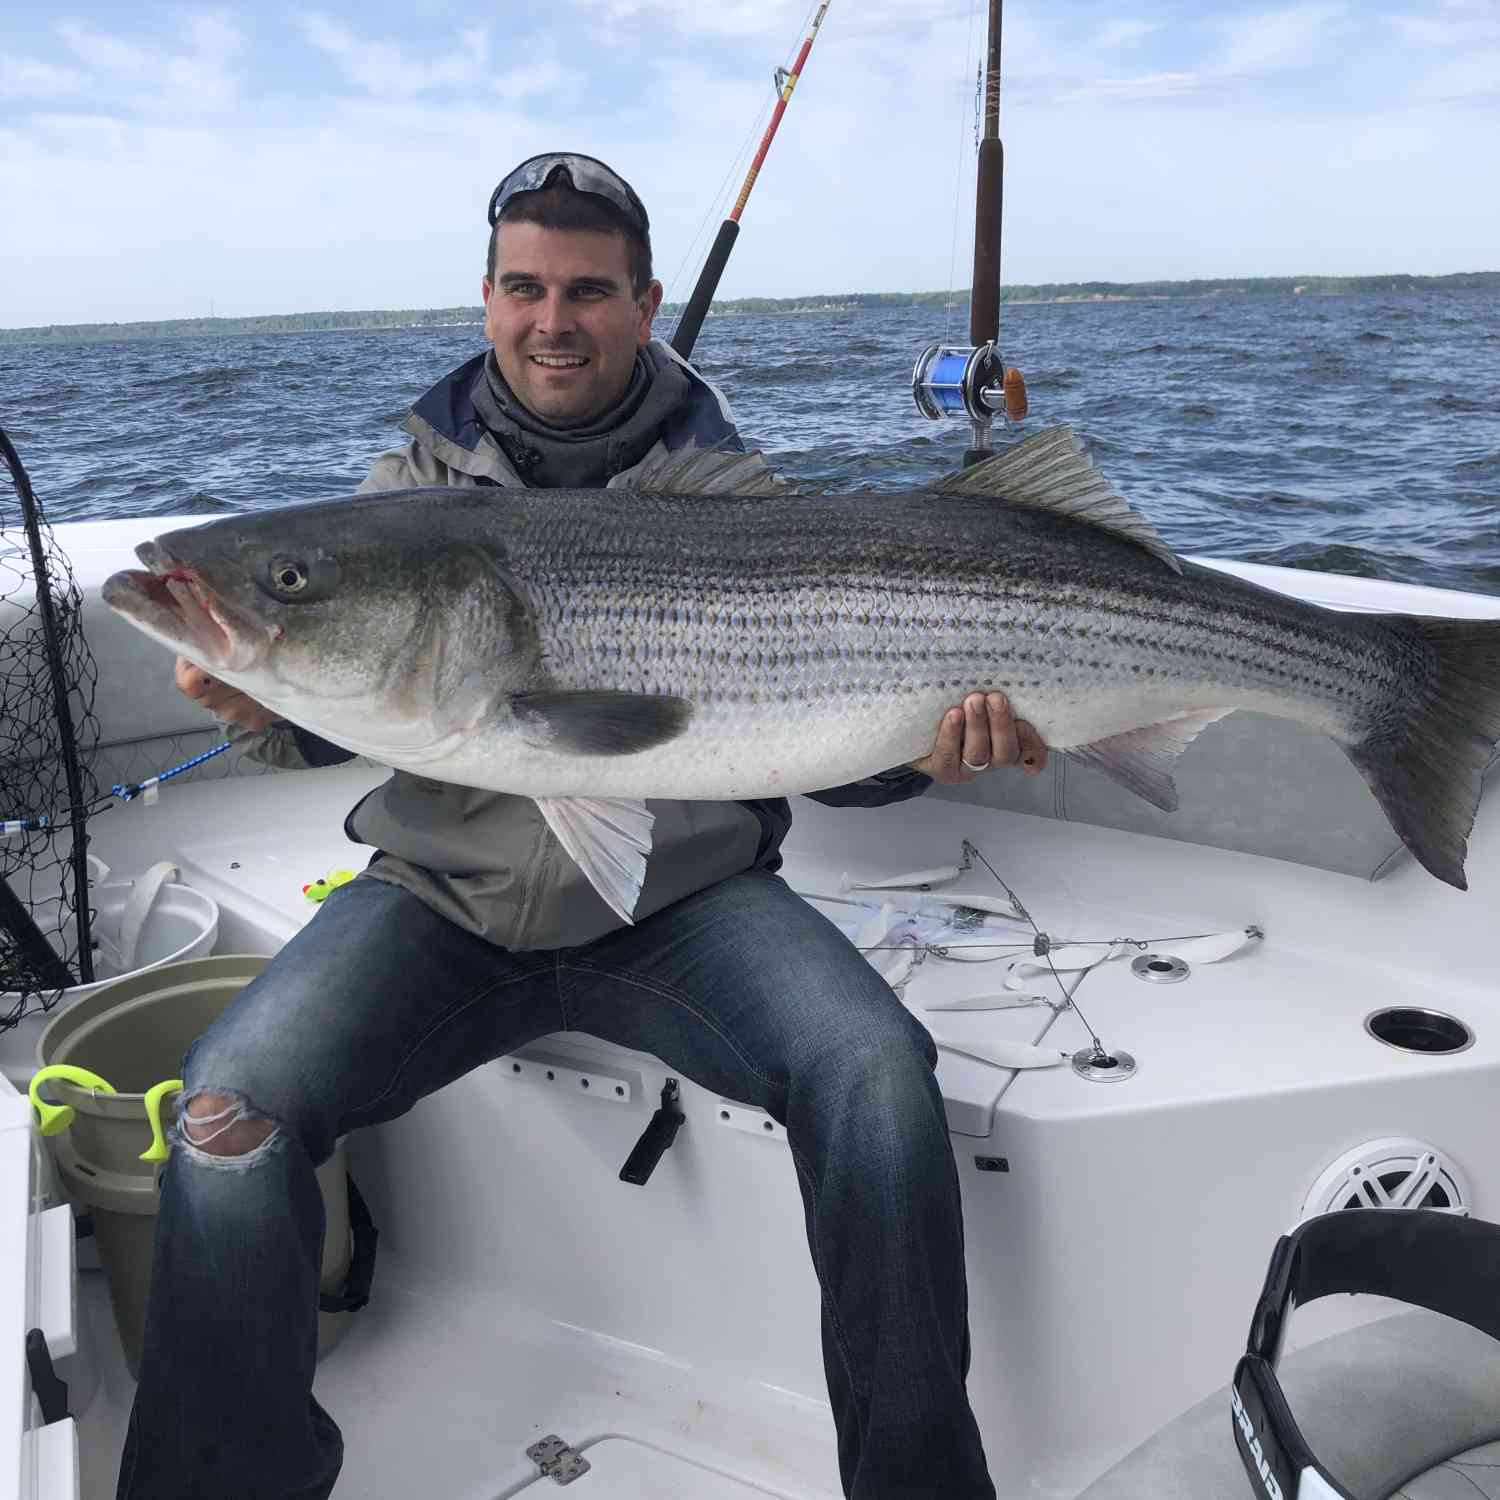 Title: Trophy Rock - On board their Sportsman Open 232 Center Console - Location: Chesapeake Bay. Participating in the Photo Contest #SportsmanMay2021